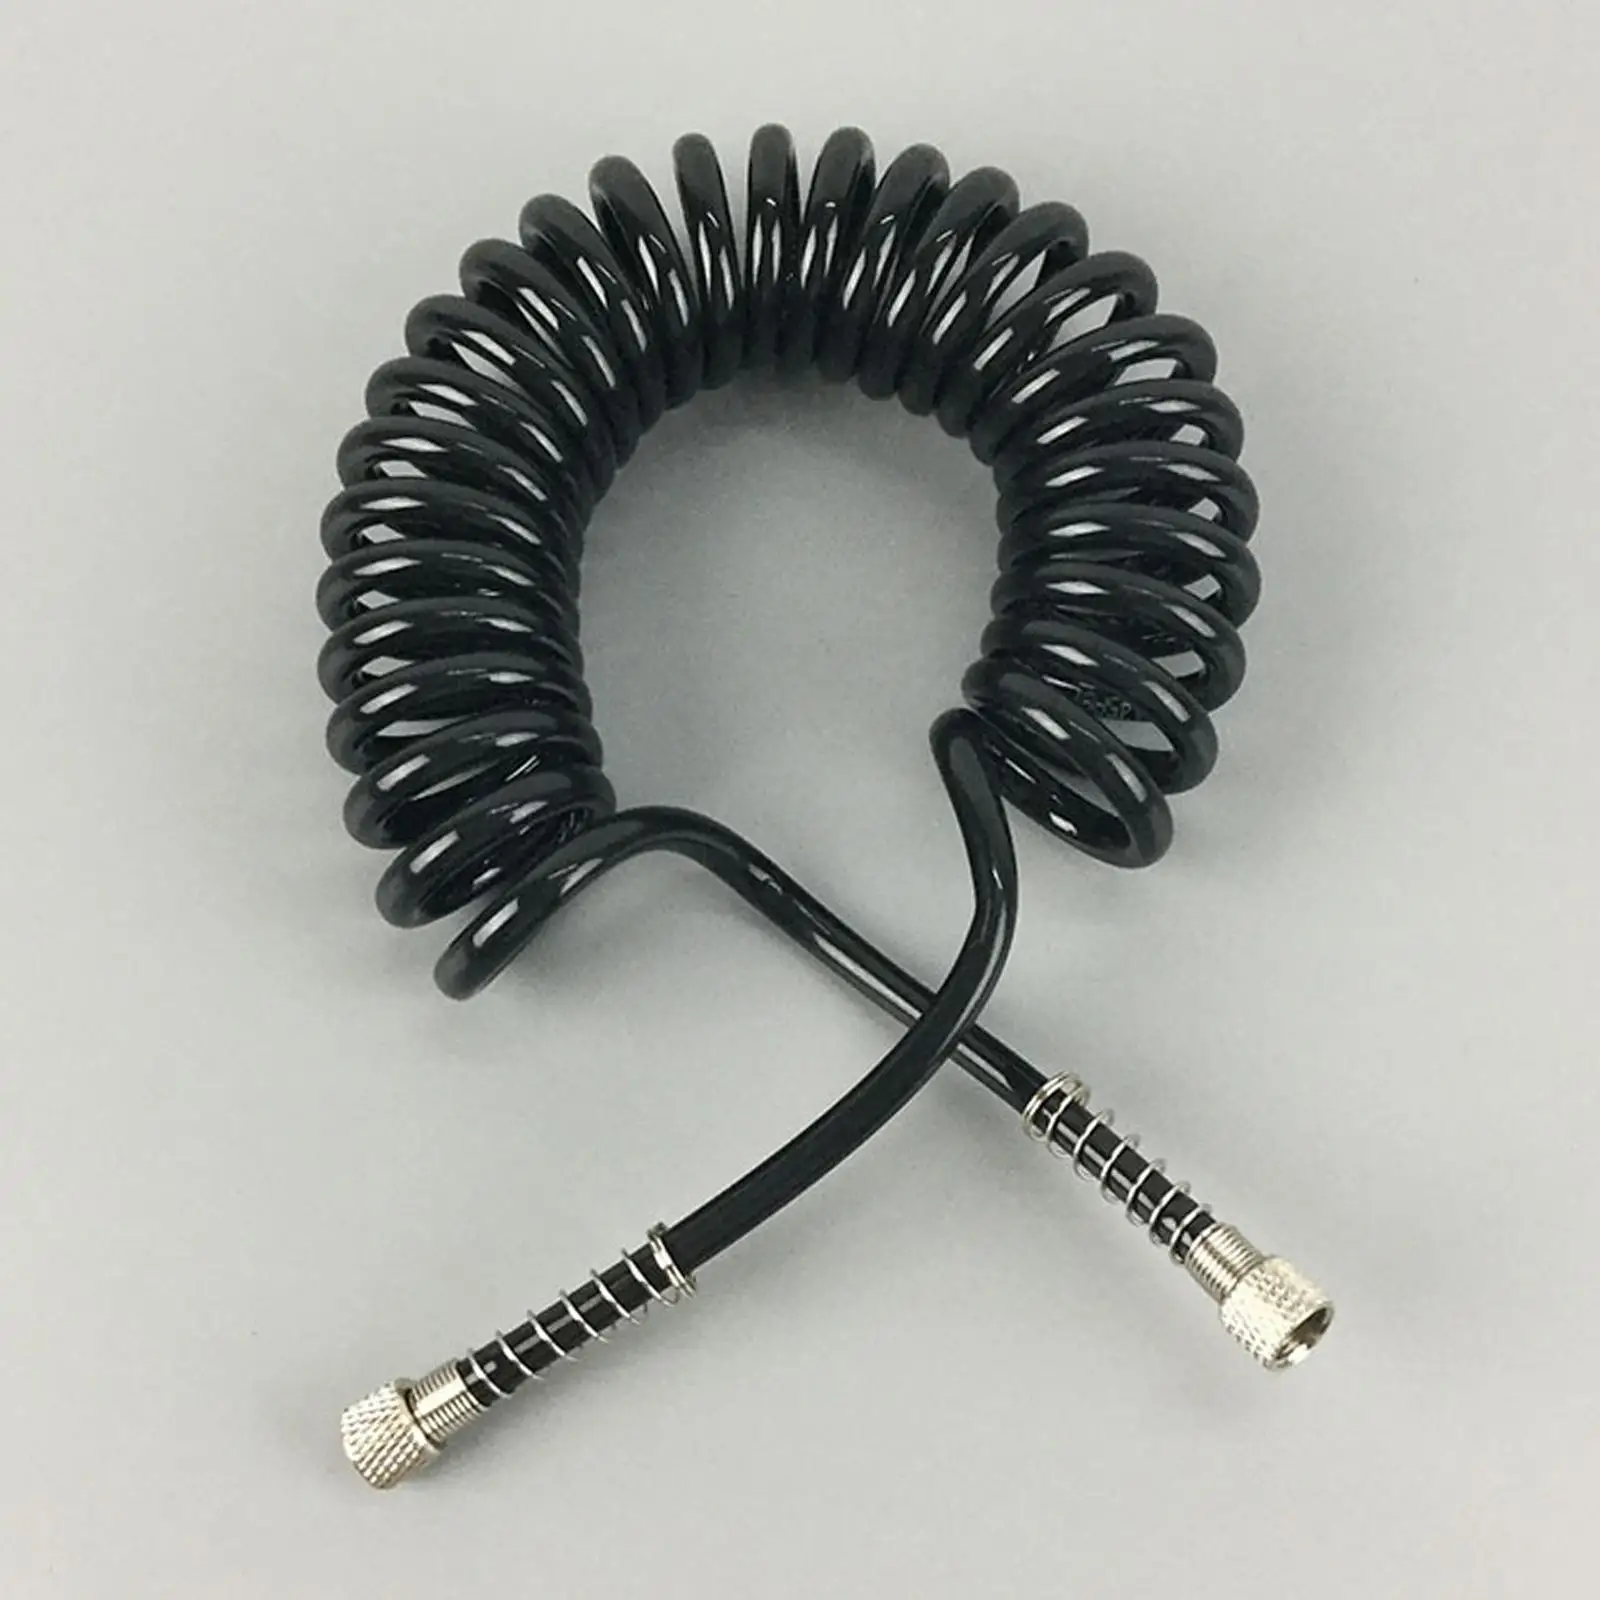 Airbrush / Retractable PU Accessories 3 Meters Connection Teleph Line/ for Brush Spray 